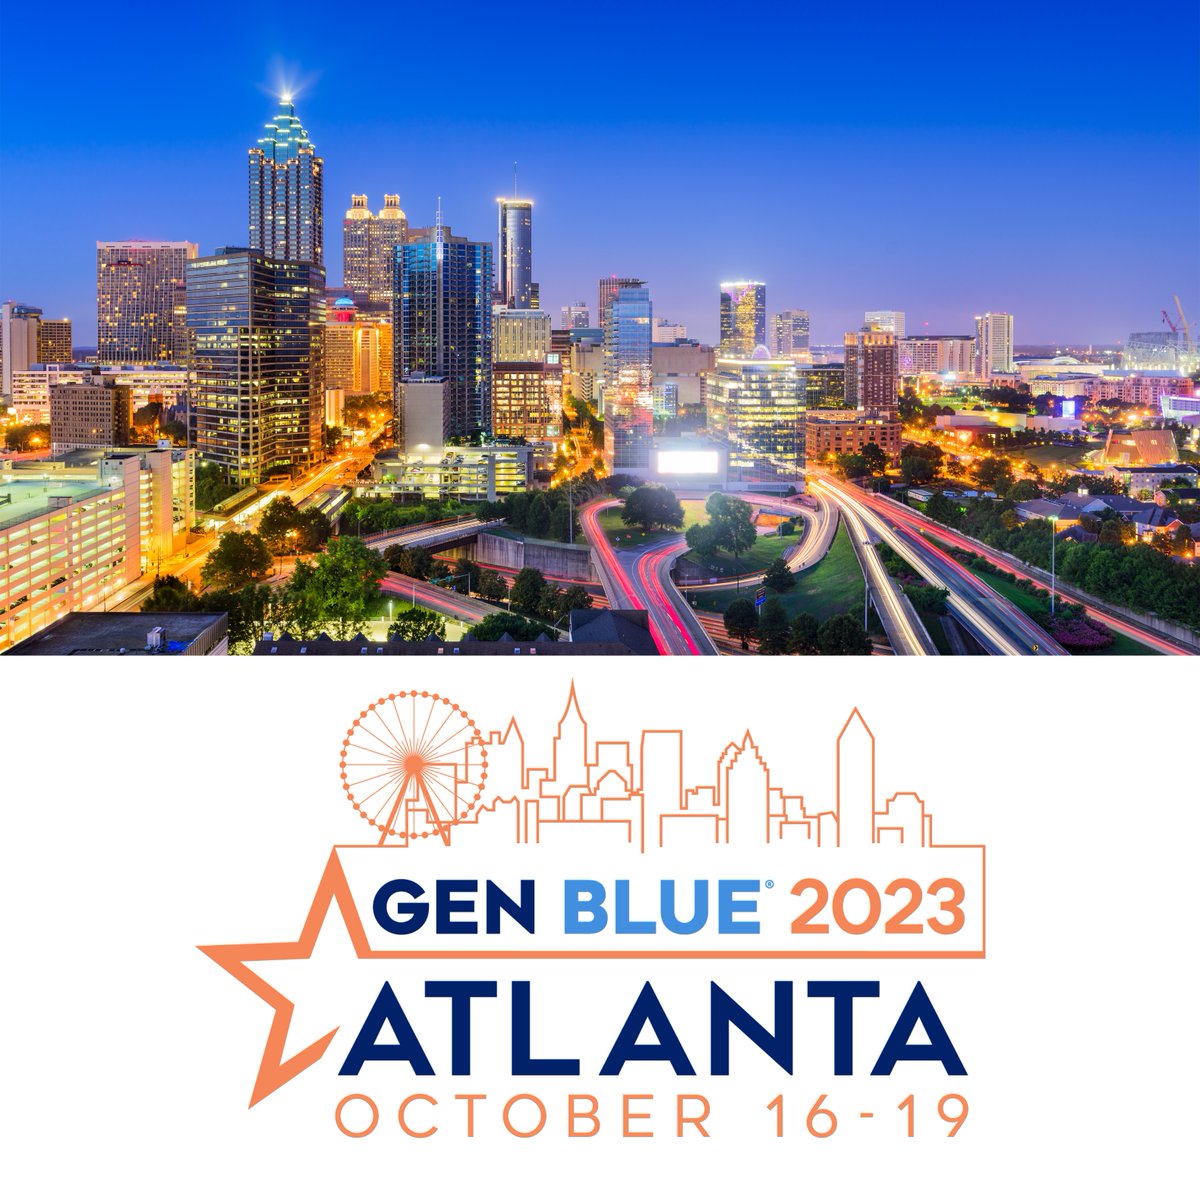 The Coldwell Banker® brand is headed South, bringing the annual Generation Blue Experience® to Atlanta, Georgia from Oct. 16 – 19! With its rich history and southern charm, Atlanta is the perfect spot for the 2023 #GenBlue. ⭐ Stay tuned for more details to come!